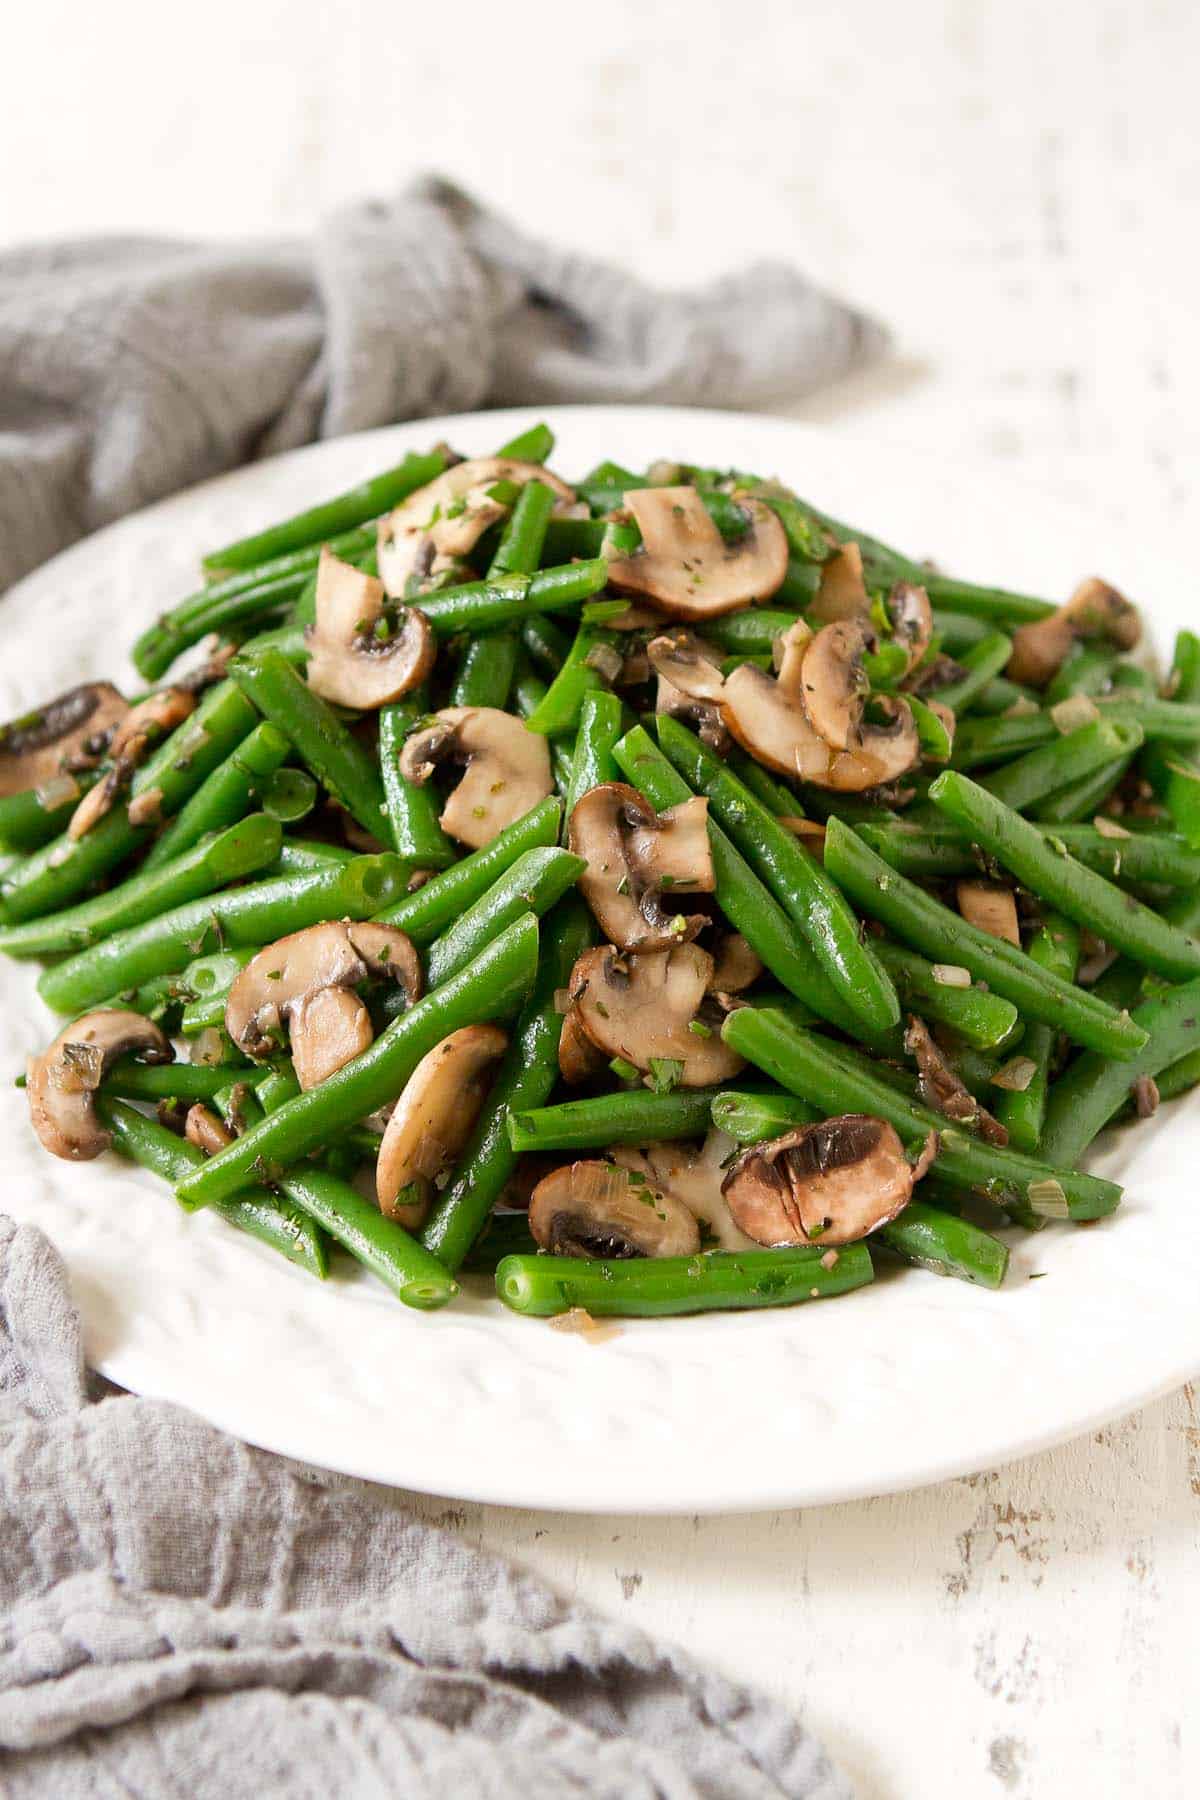 Green bean and mushroom side dish on a white plate, with gray napkin.